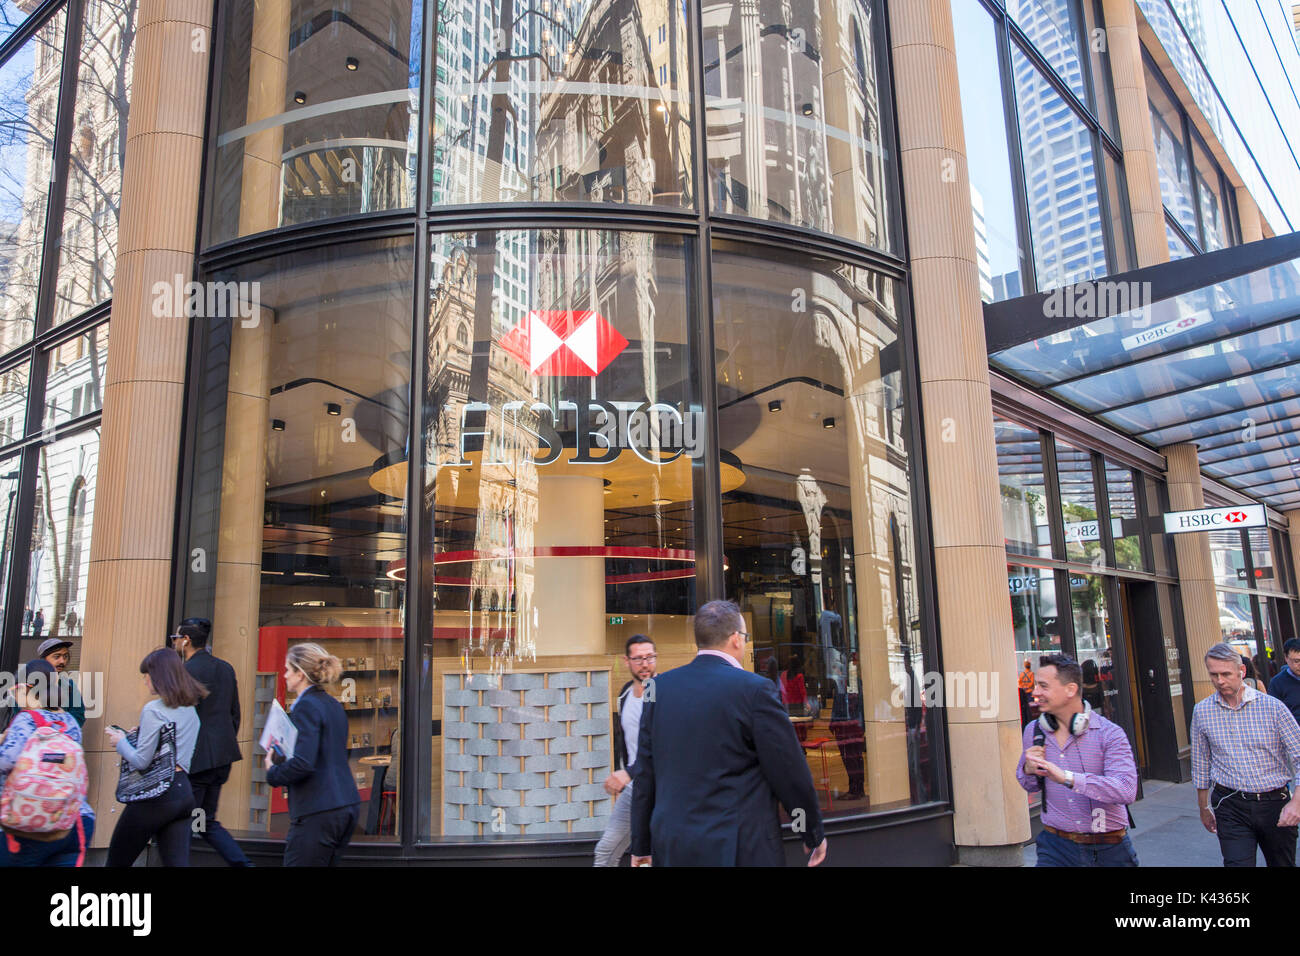 HSBC bank branch in George street, Sydney city centre,New south wales,Australia Stock Photo